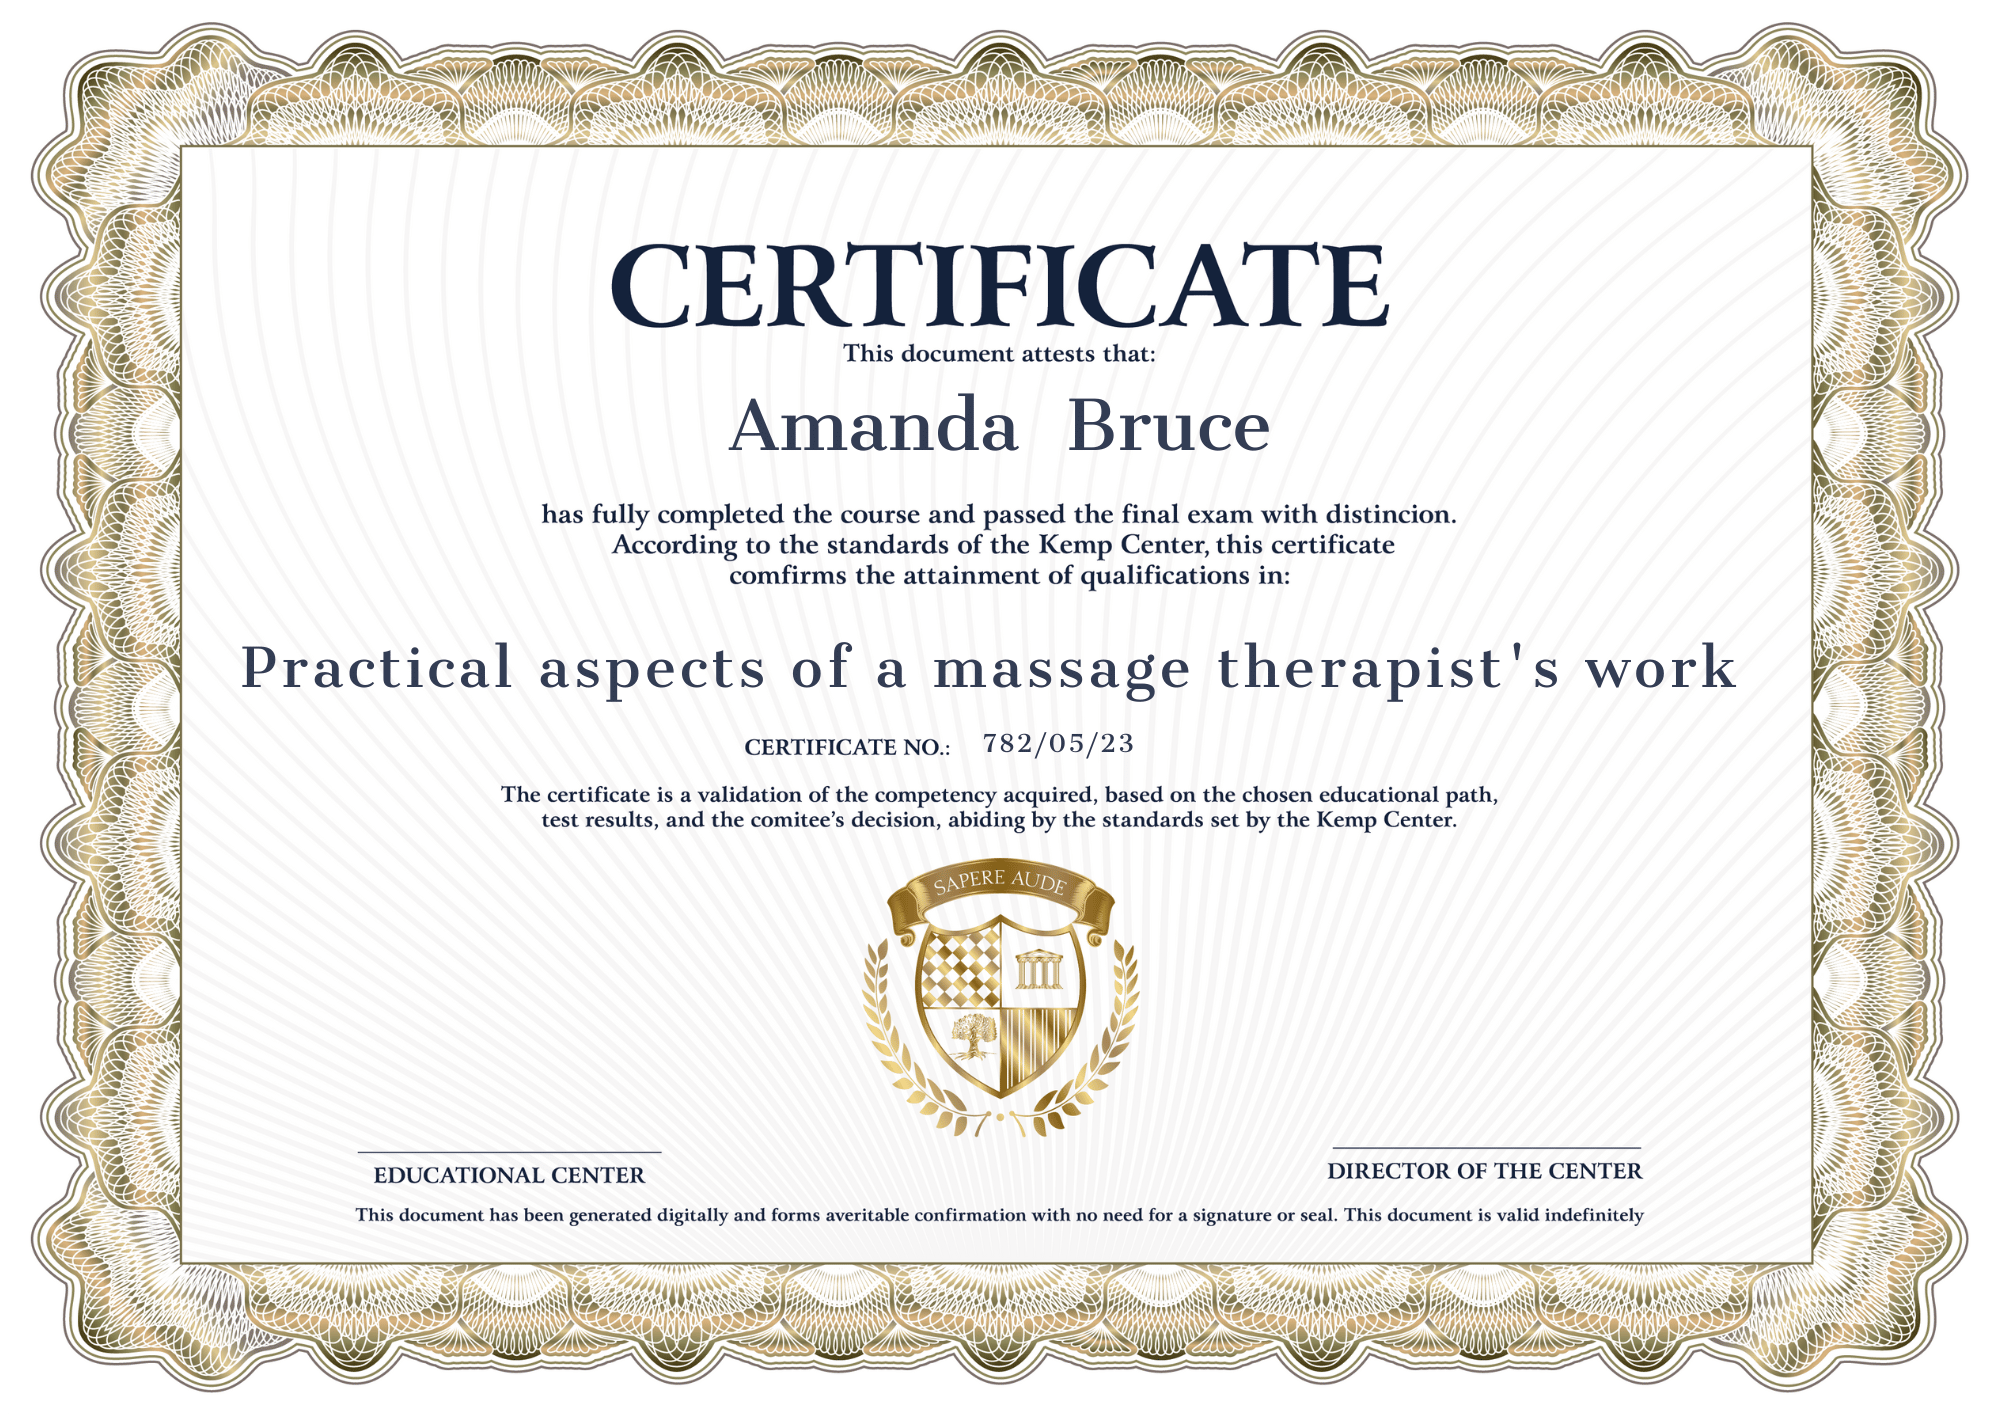 Certificate Practical aspects of a massage therapist's work